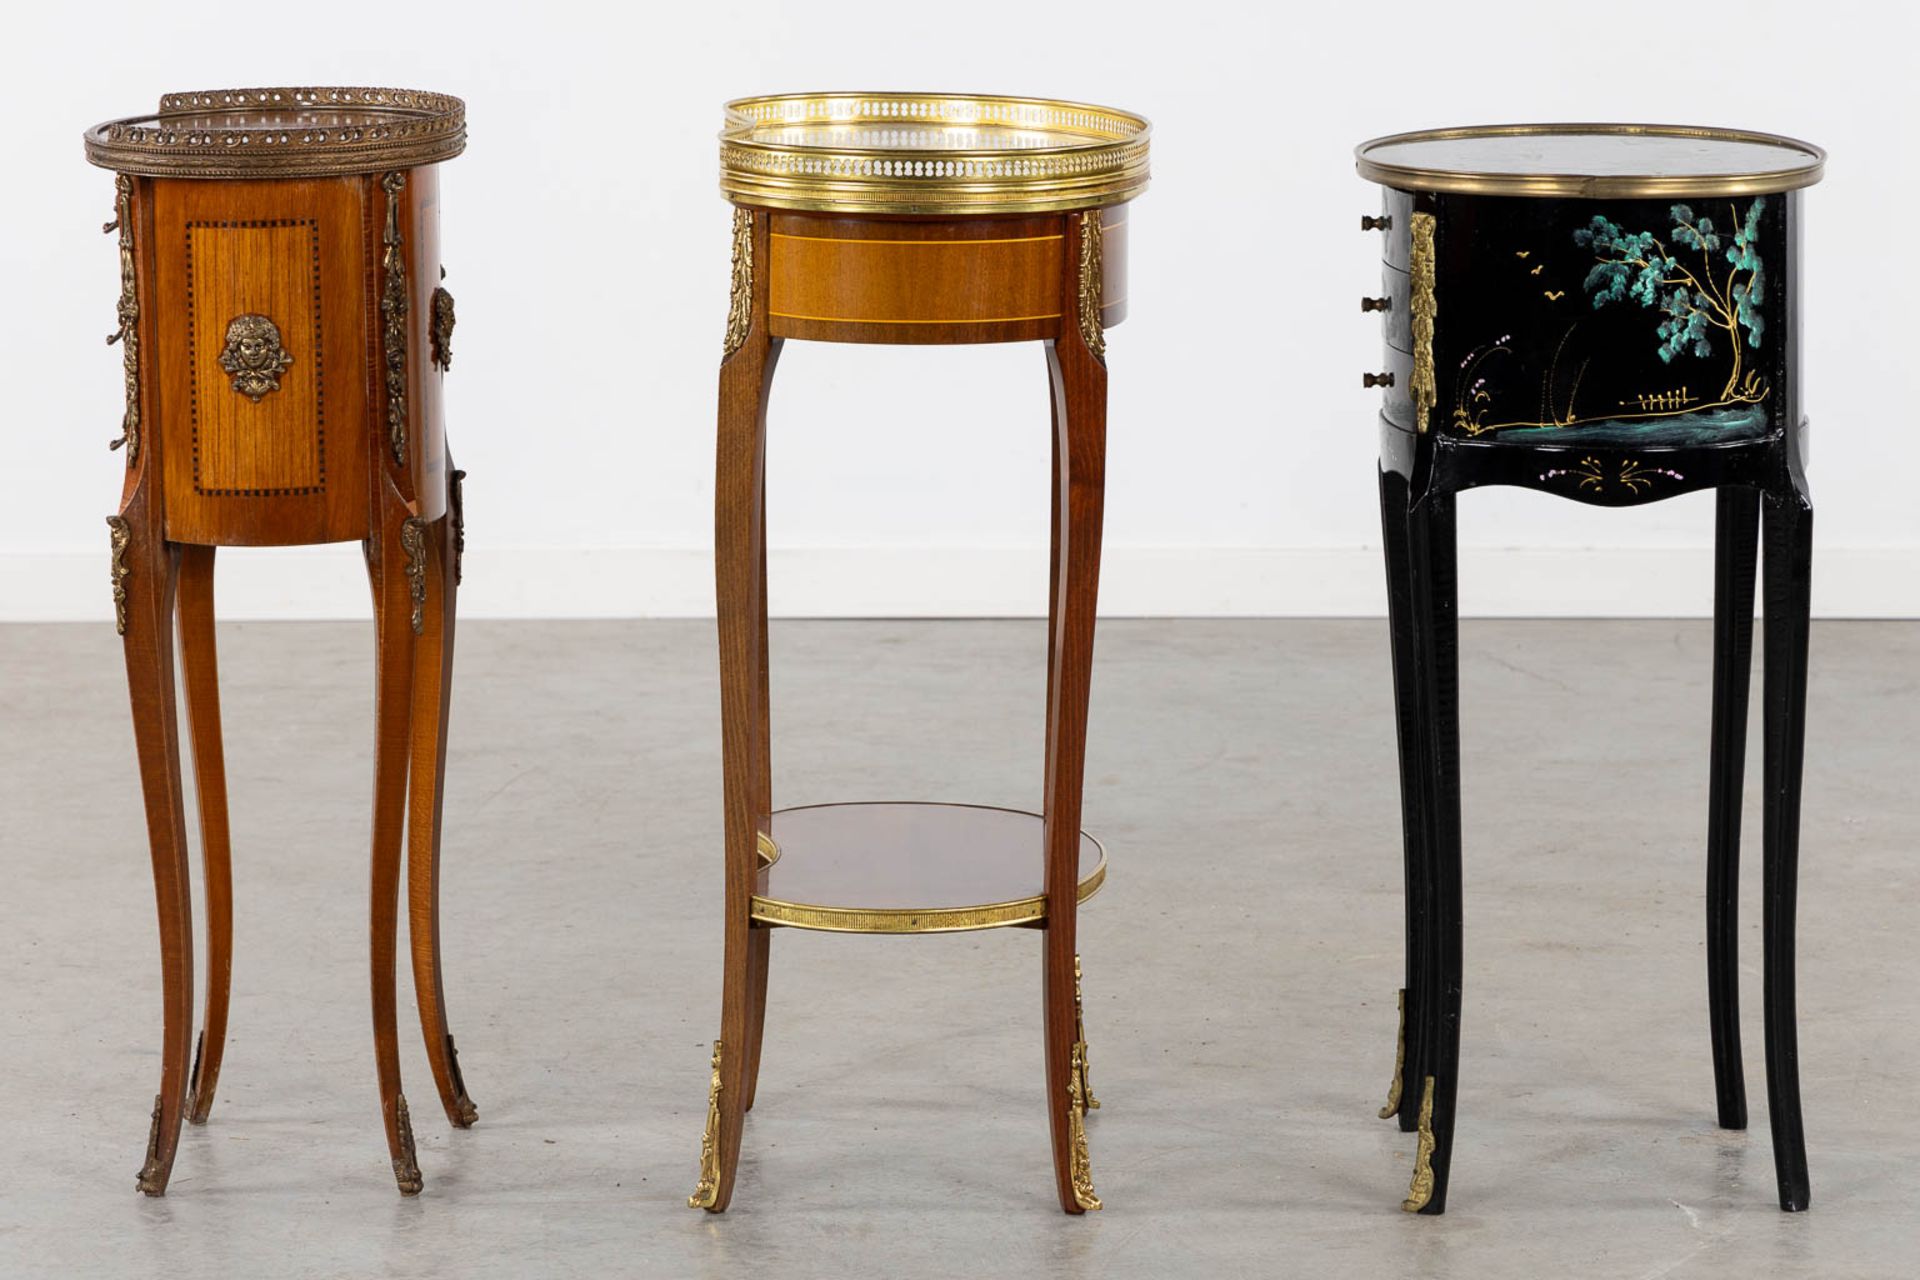 Three small side tables, marquetry and painted decor. 20th C. (L:30 x W:44 x H:71 cm) - Image 7 of 14